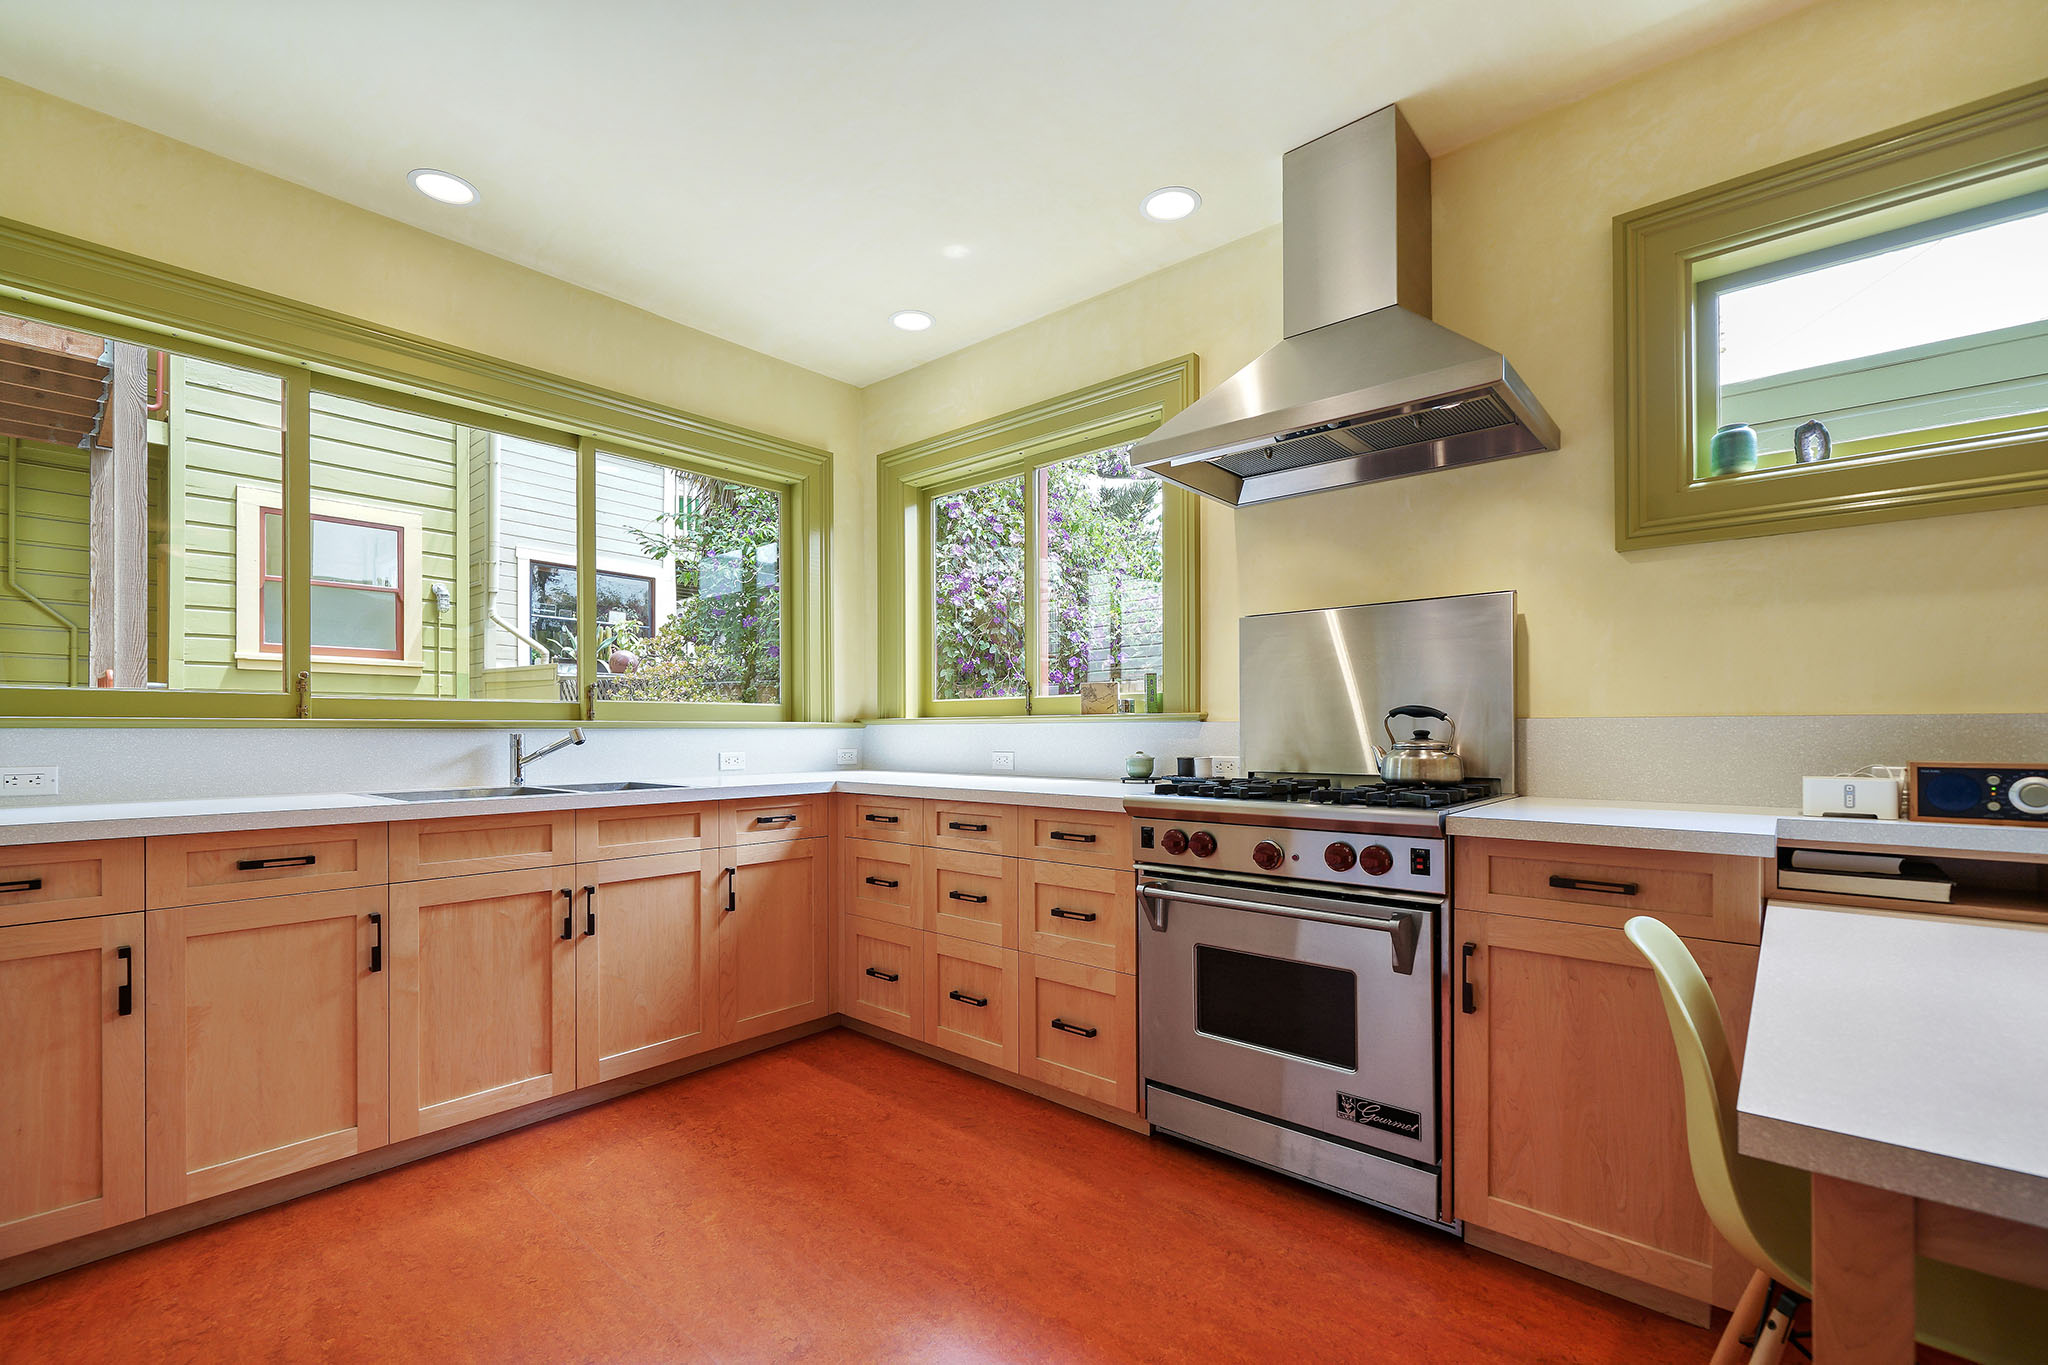 Property Photo: Close-up of the kitchen, showing windows, lots of cabinets and a large stove